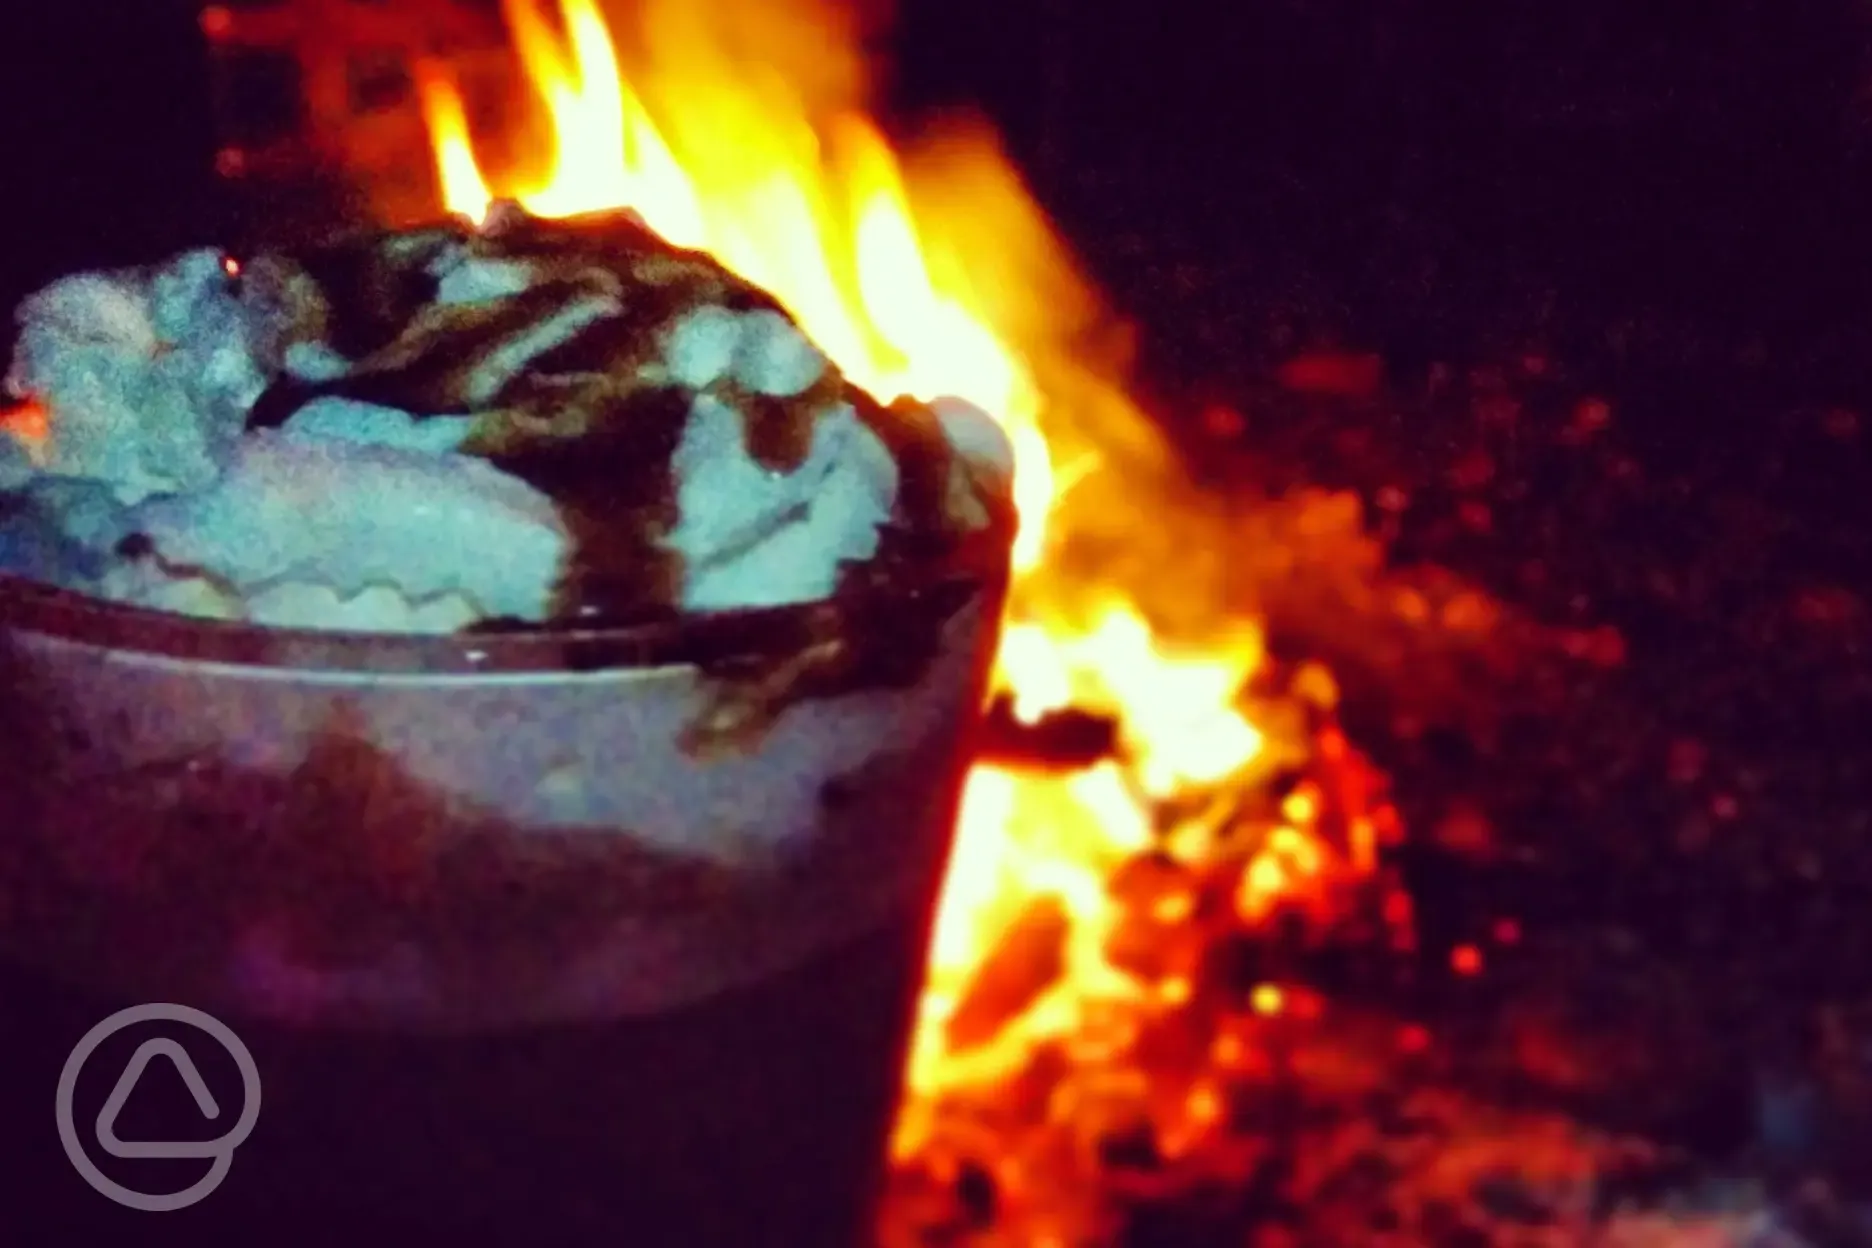 Bonfire with hot chocolate